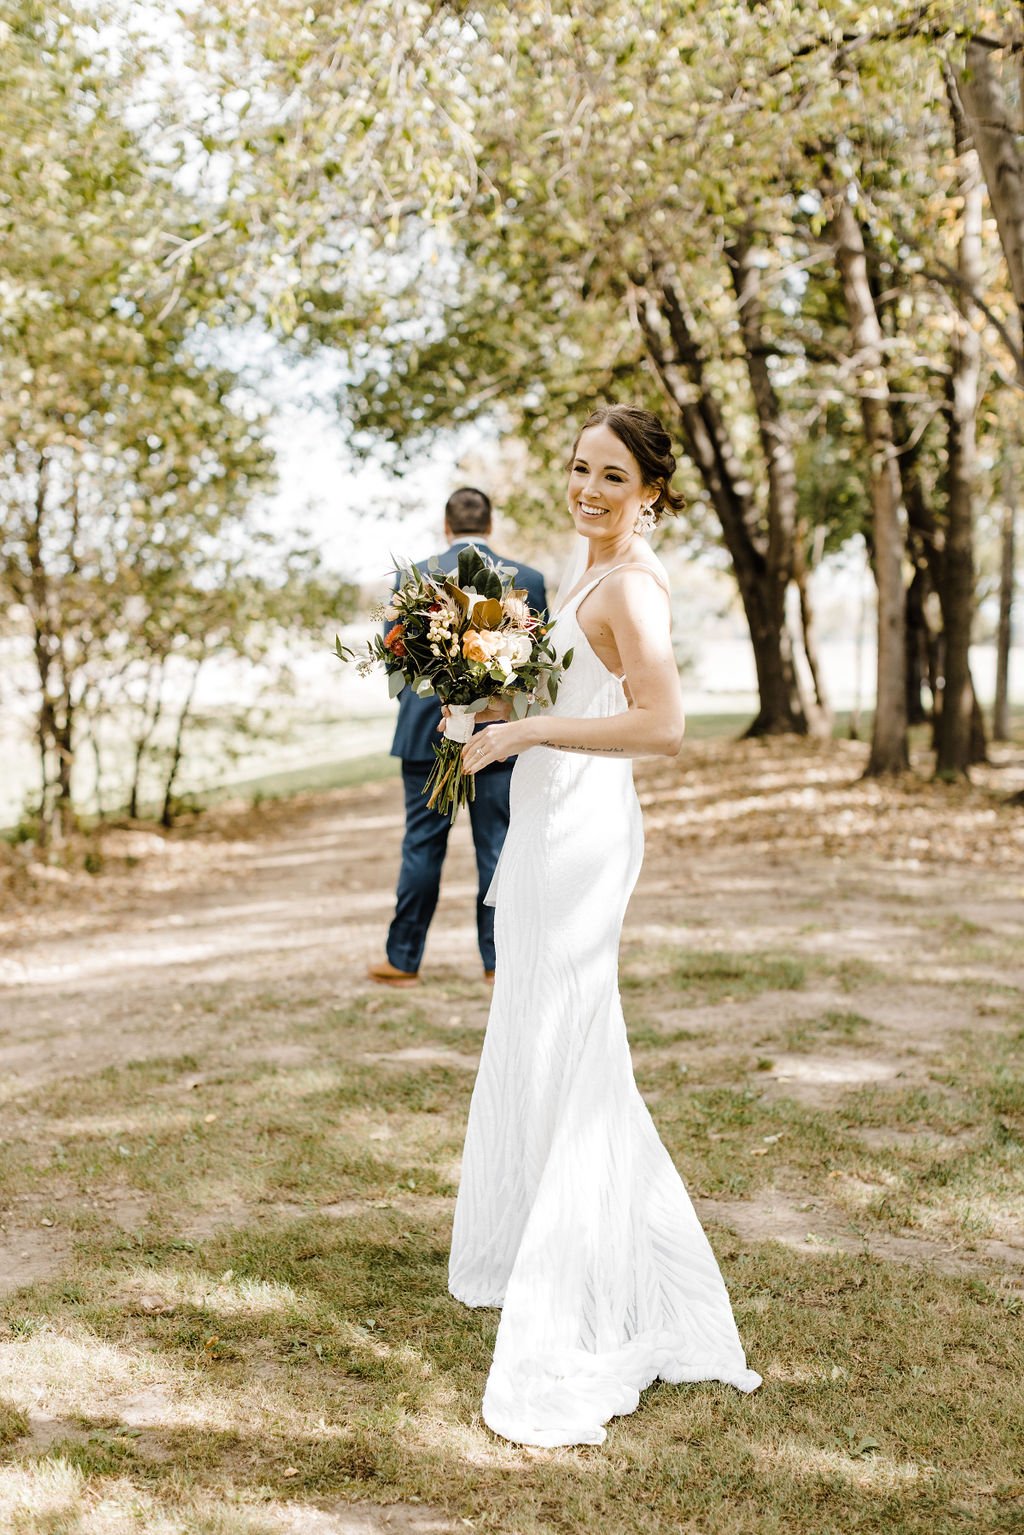 bright and sunny first look photos in an alyssa kristin wedding dress